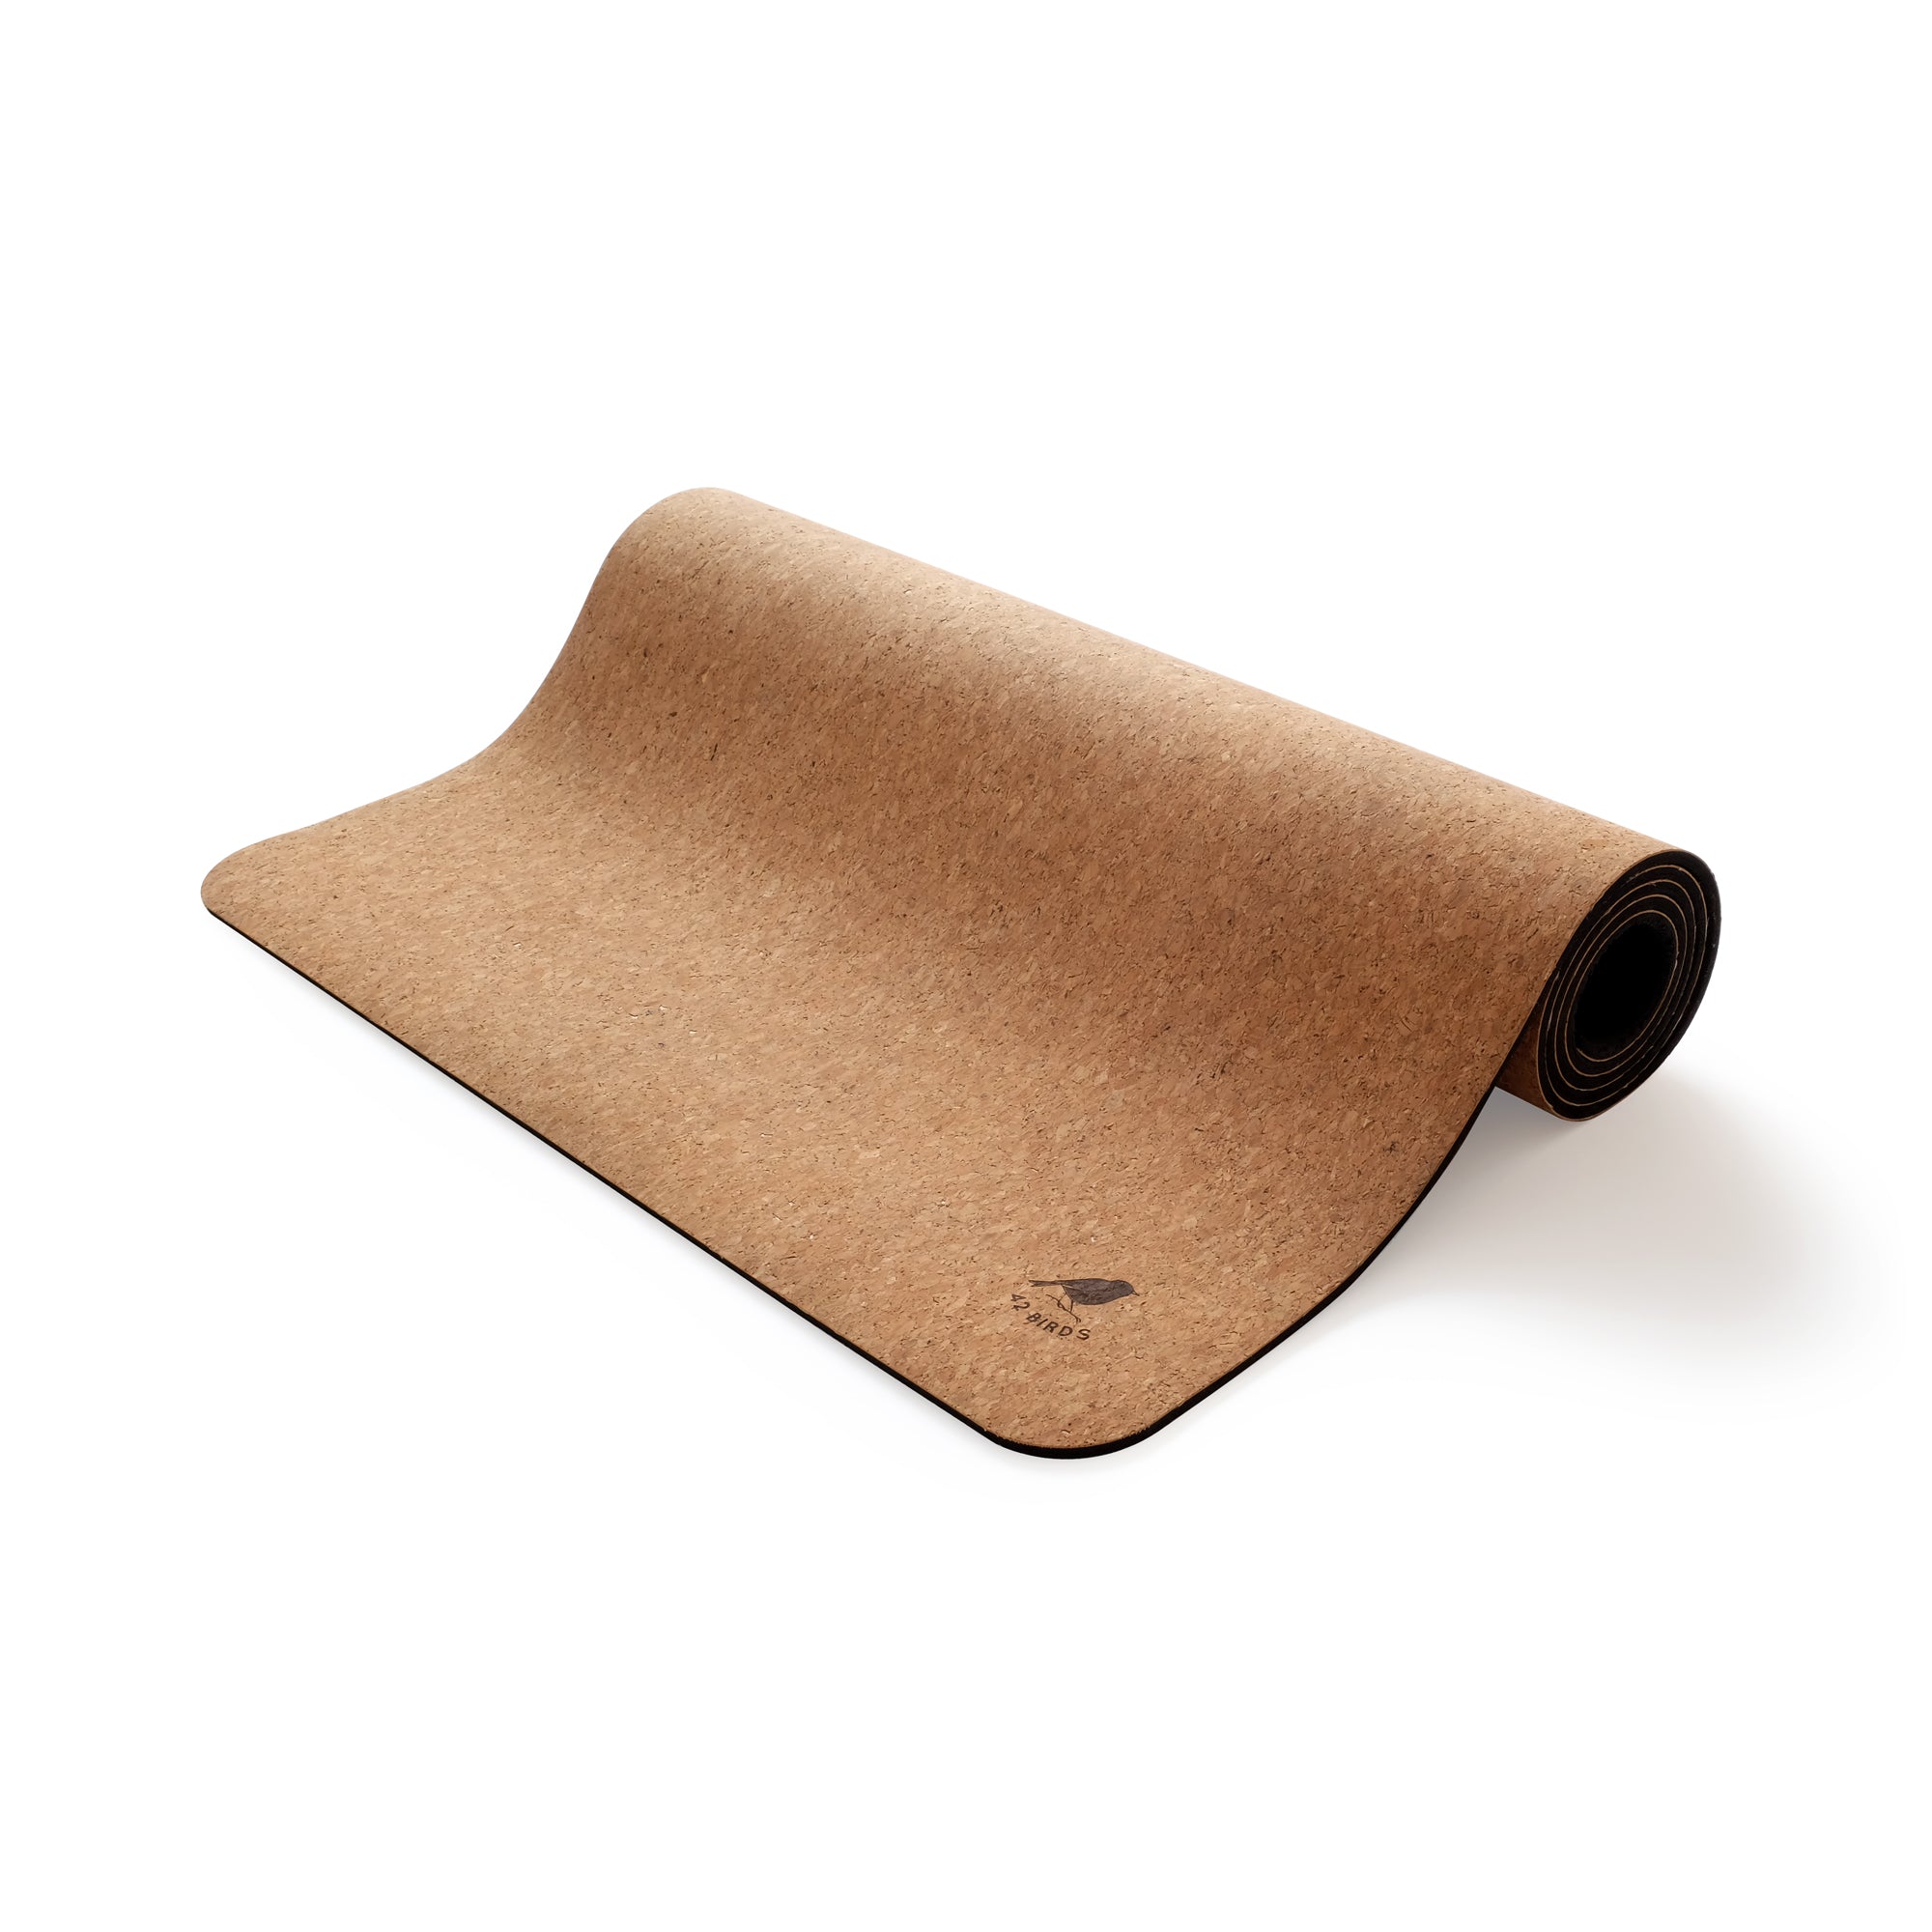 FrenzyBird 5mm Cork Yoga Mat with Carrying Strap and Alignment